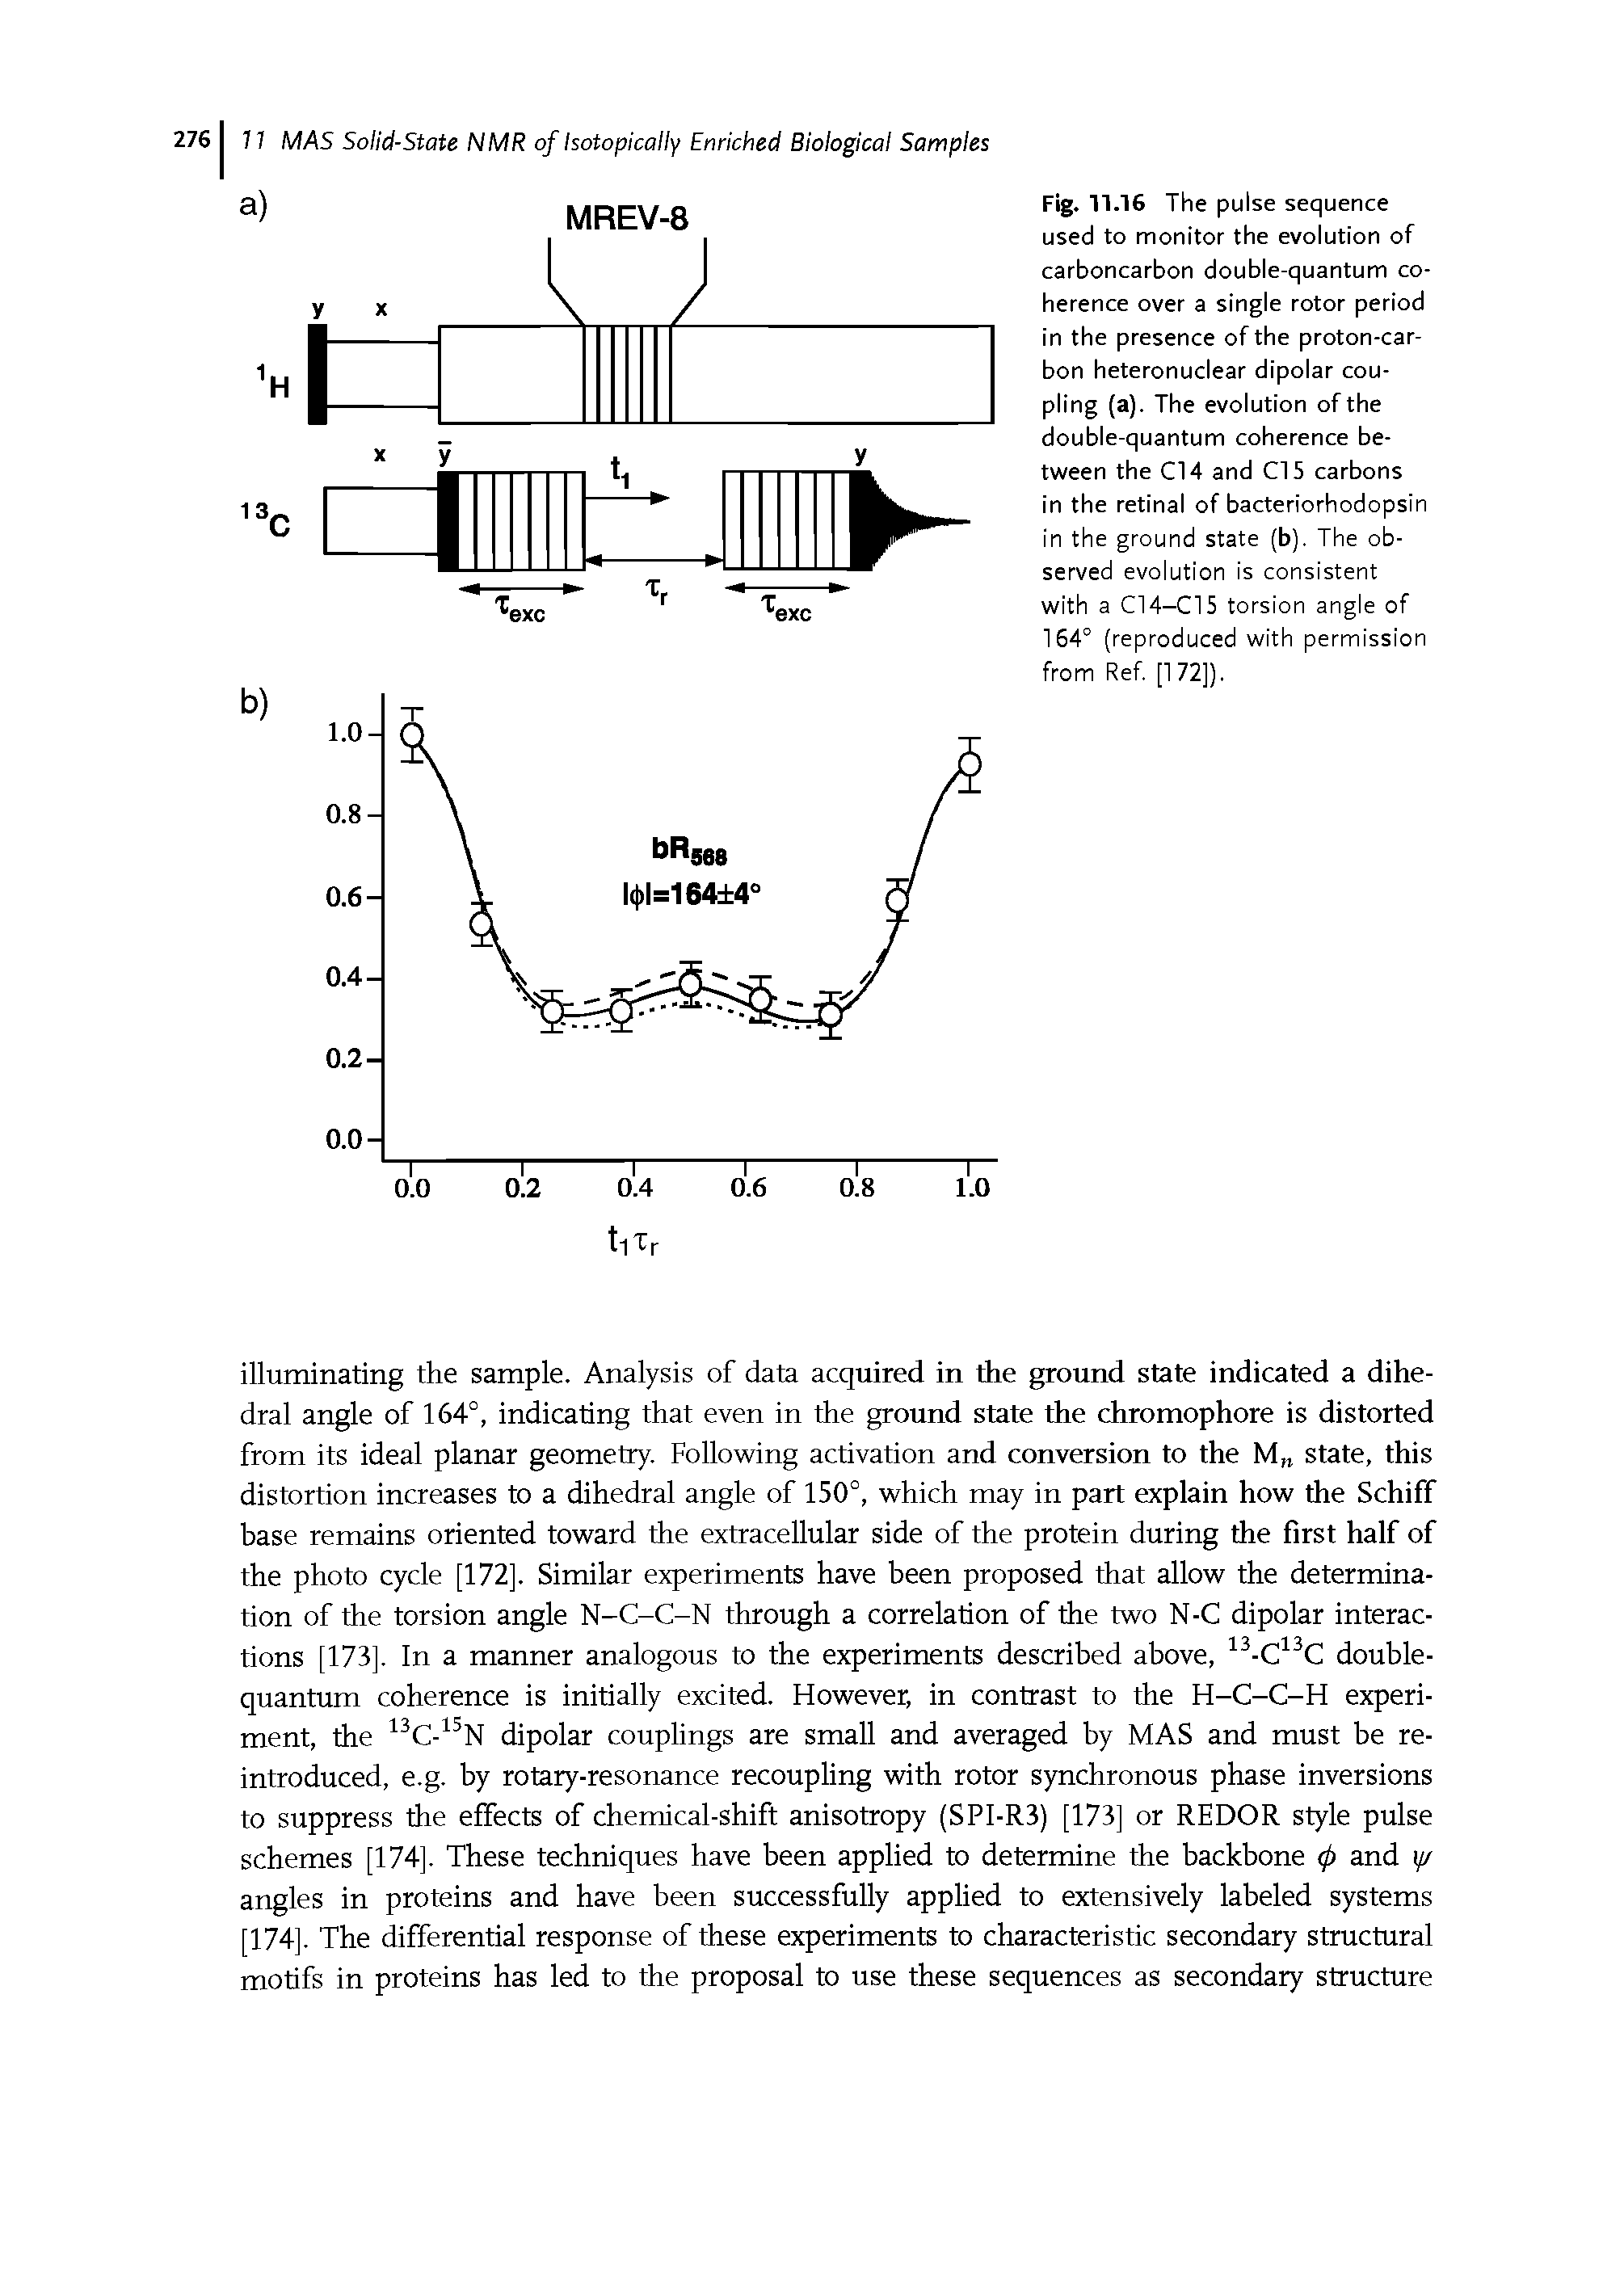 Fig. 11.16 The pulse sequence used to monitor the evolution of carboncarbon double-quantum coherence over a single rotor period in the presence of the proton-carbon heteronuclear dipolar coupling (a). The evolution of the double-quantum coherence between the Cl 4 and Cl 5 carbons in the retinal of bacteriorhodopsin in the ground state (b). The observed evolution is consistent with a C14-C15 torsion angle of 164° (reproduced with permission from Ref. [172]).